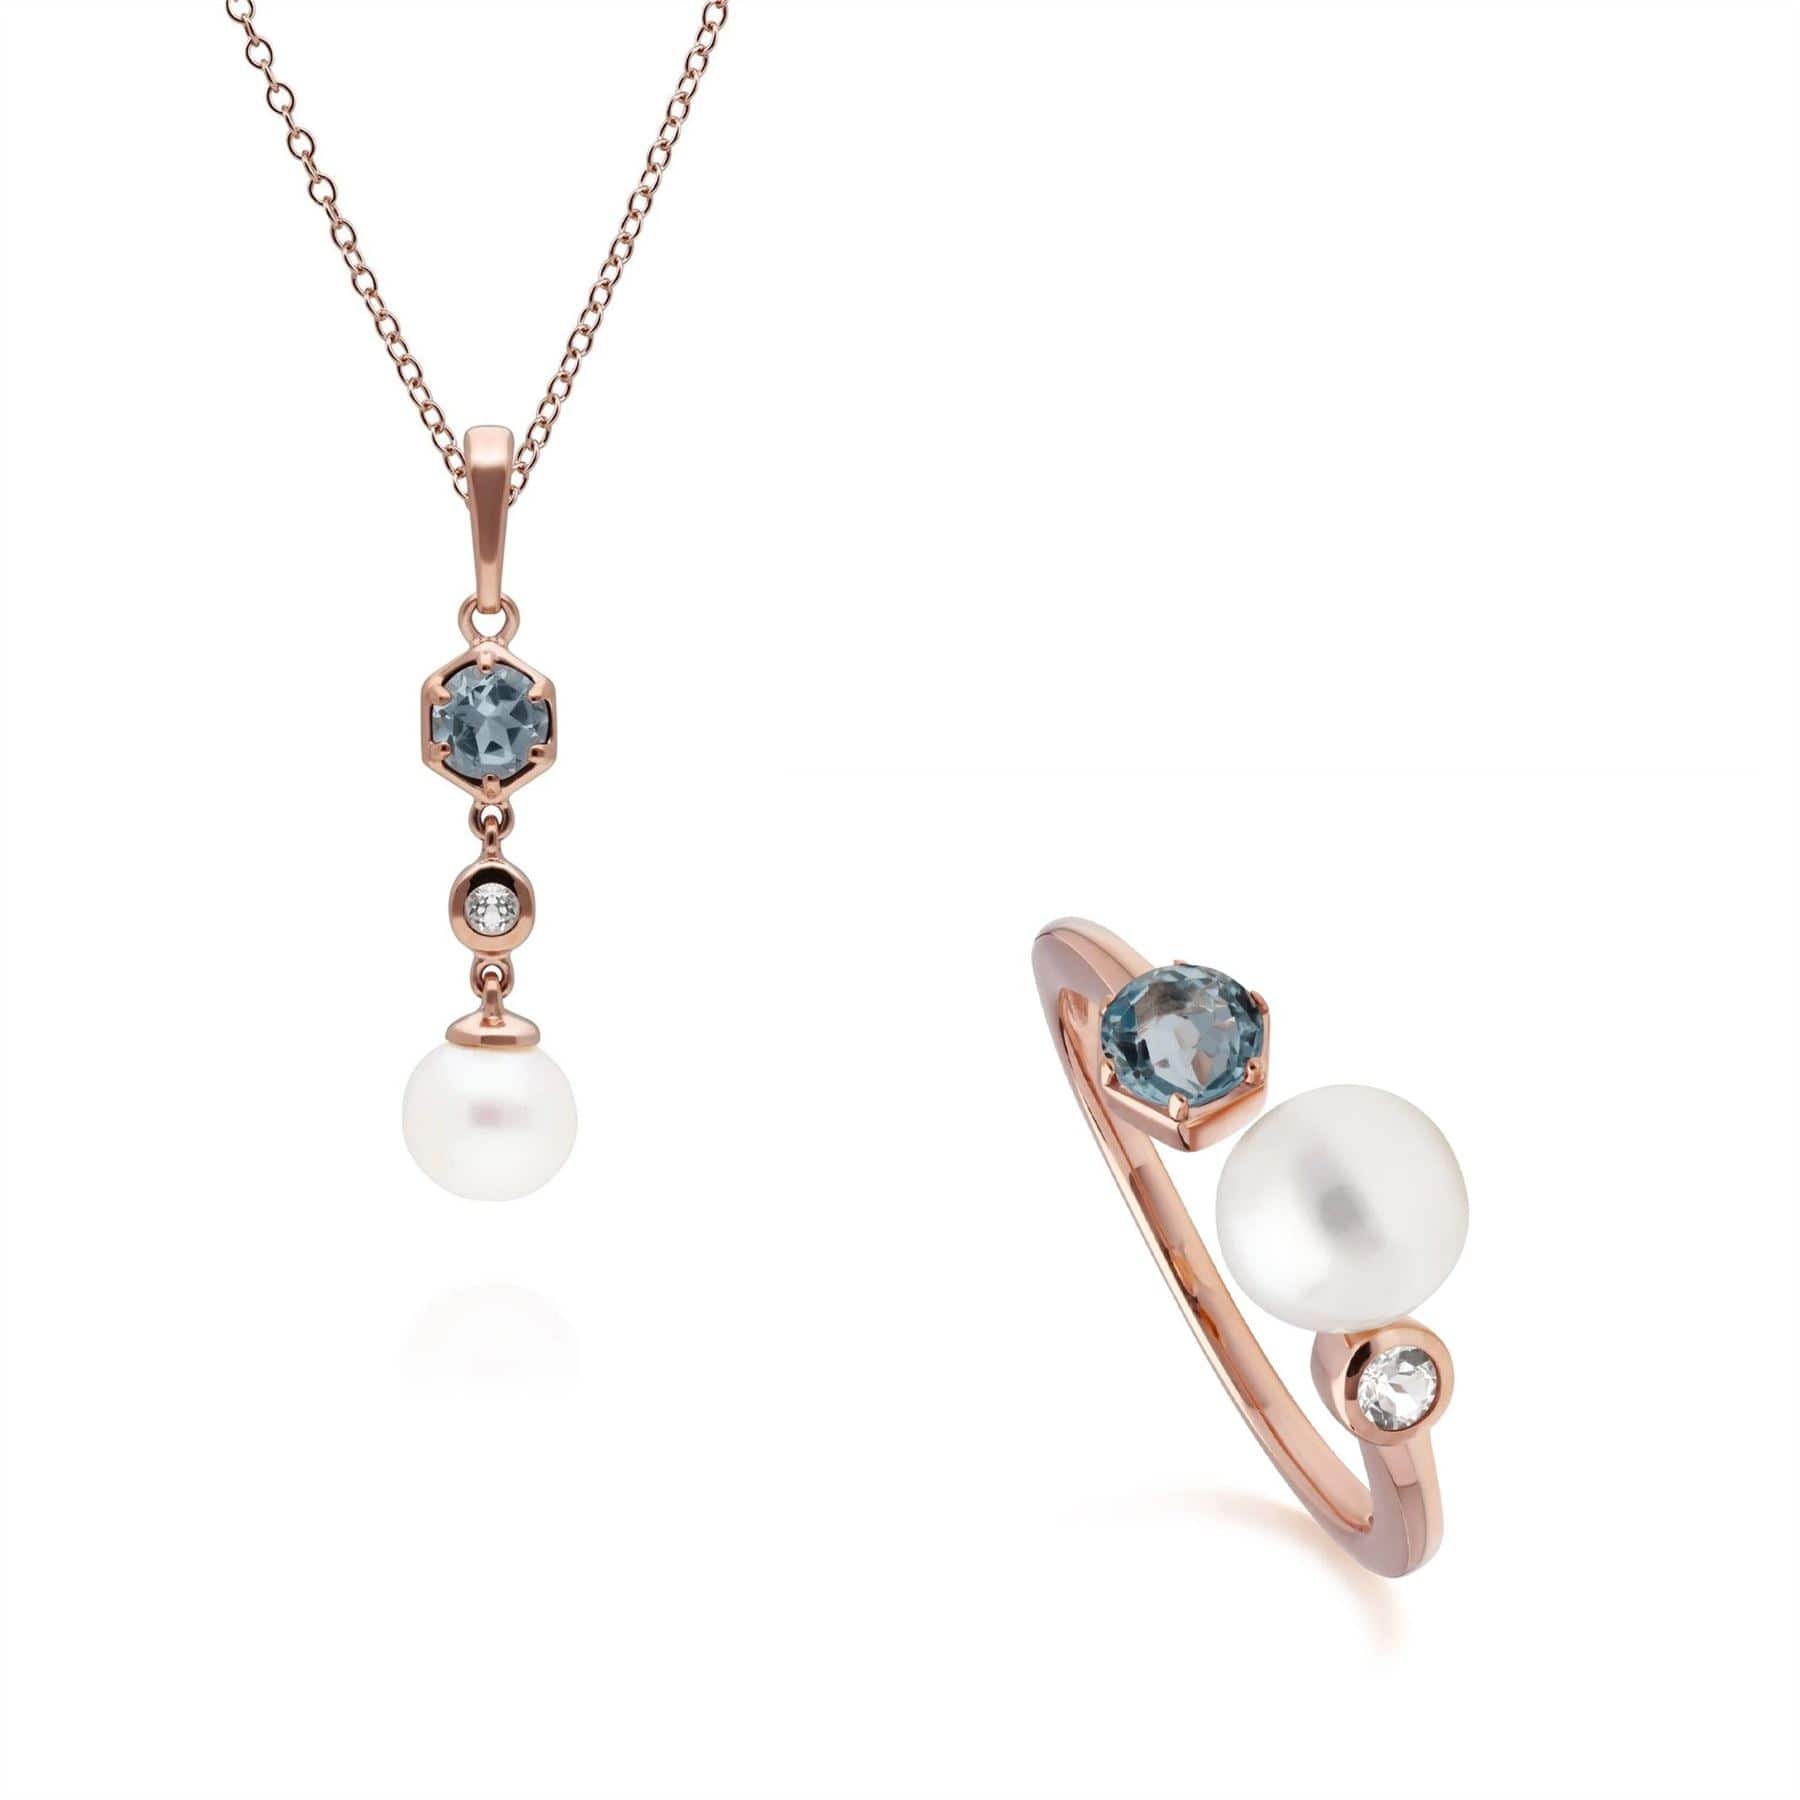 Modern Pearl & Topaz Pendant & Ring Set in Rose Gold Plated Sterling Silver - Gemondo